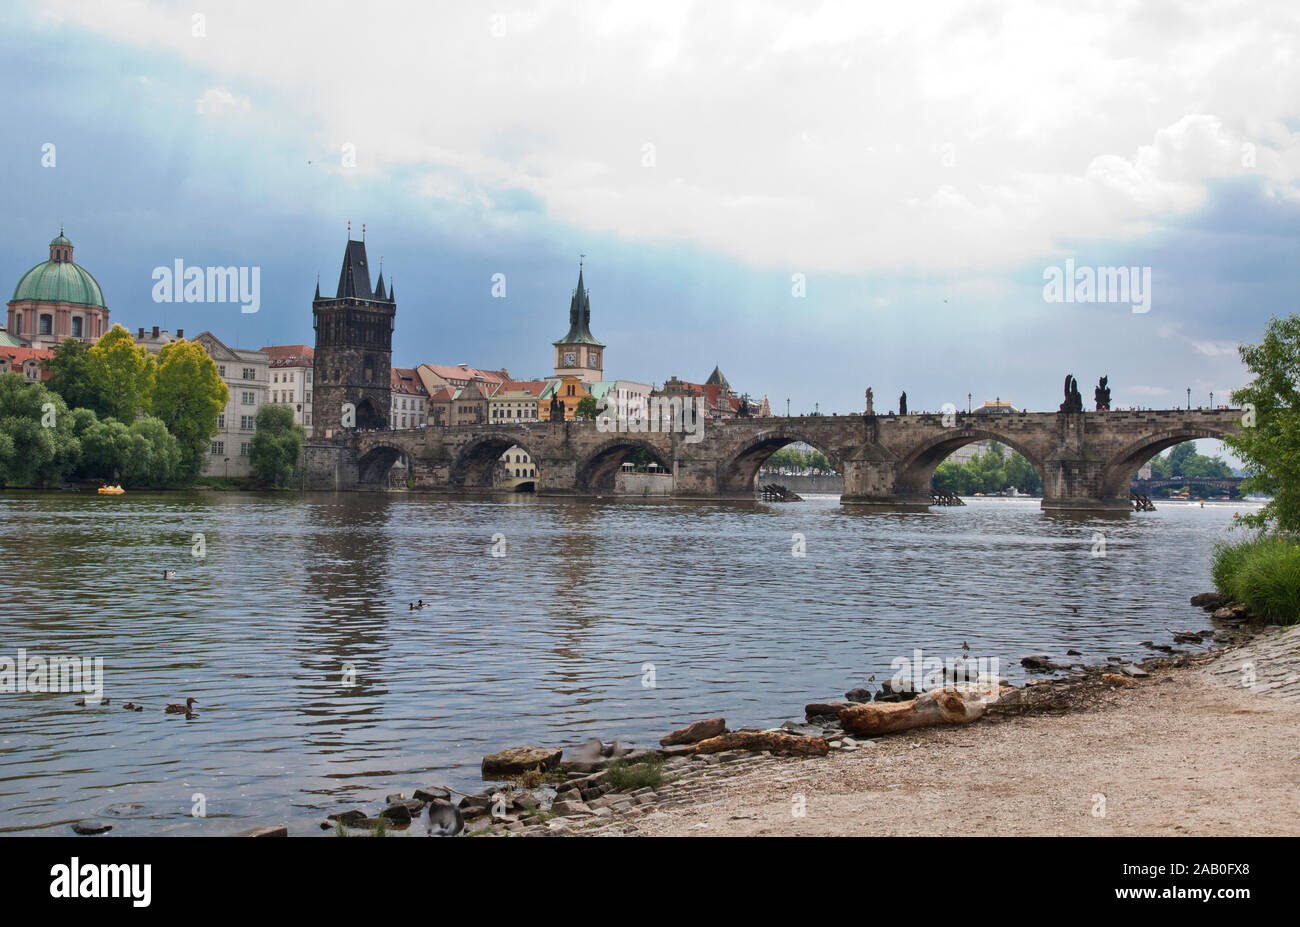 The famous Charles Bridge The Old Town Bridge Tower started in 1357 under the auspices of King Charles IV, and finished in the beginning of the 15th c Stock Photo